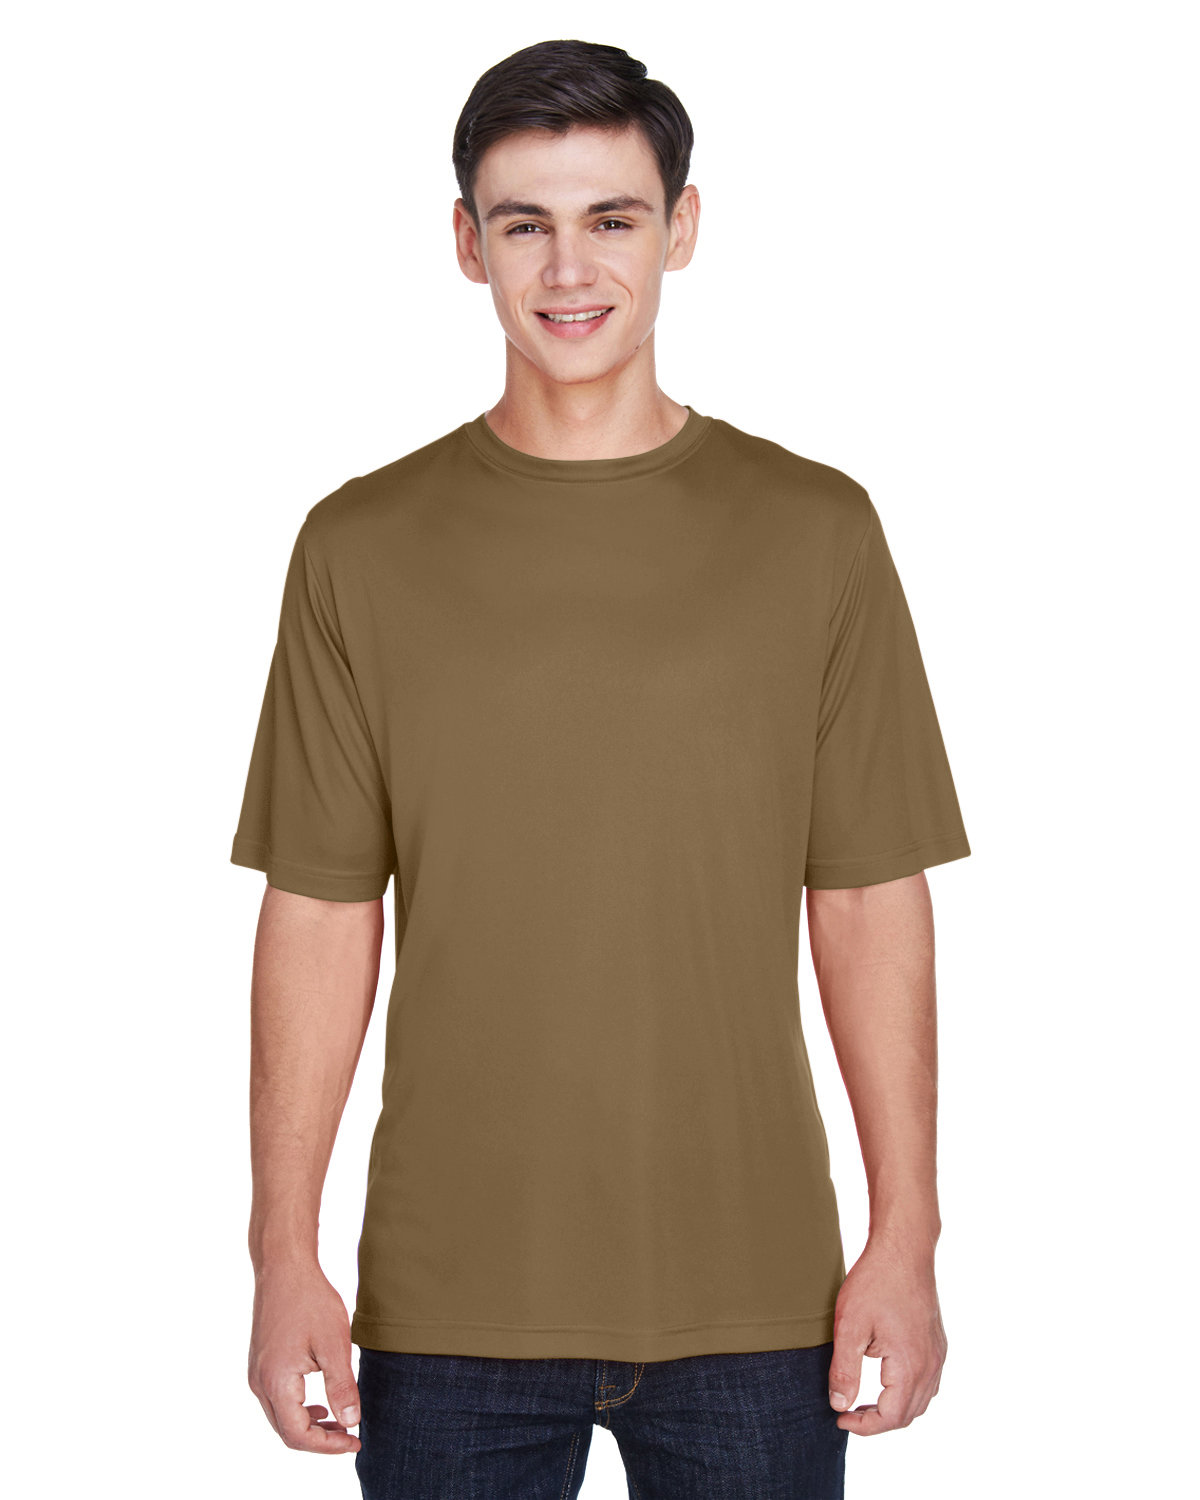 Team 365 Men's Zone Performance T-Shirt coyote brown 